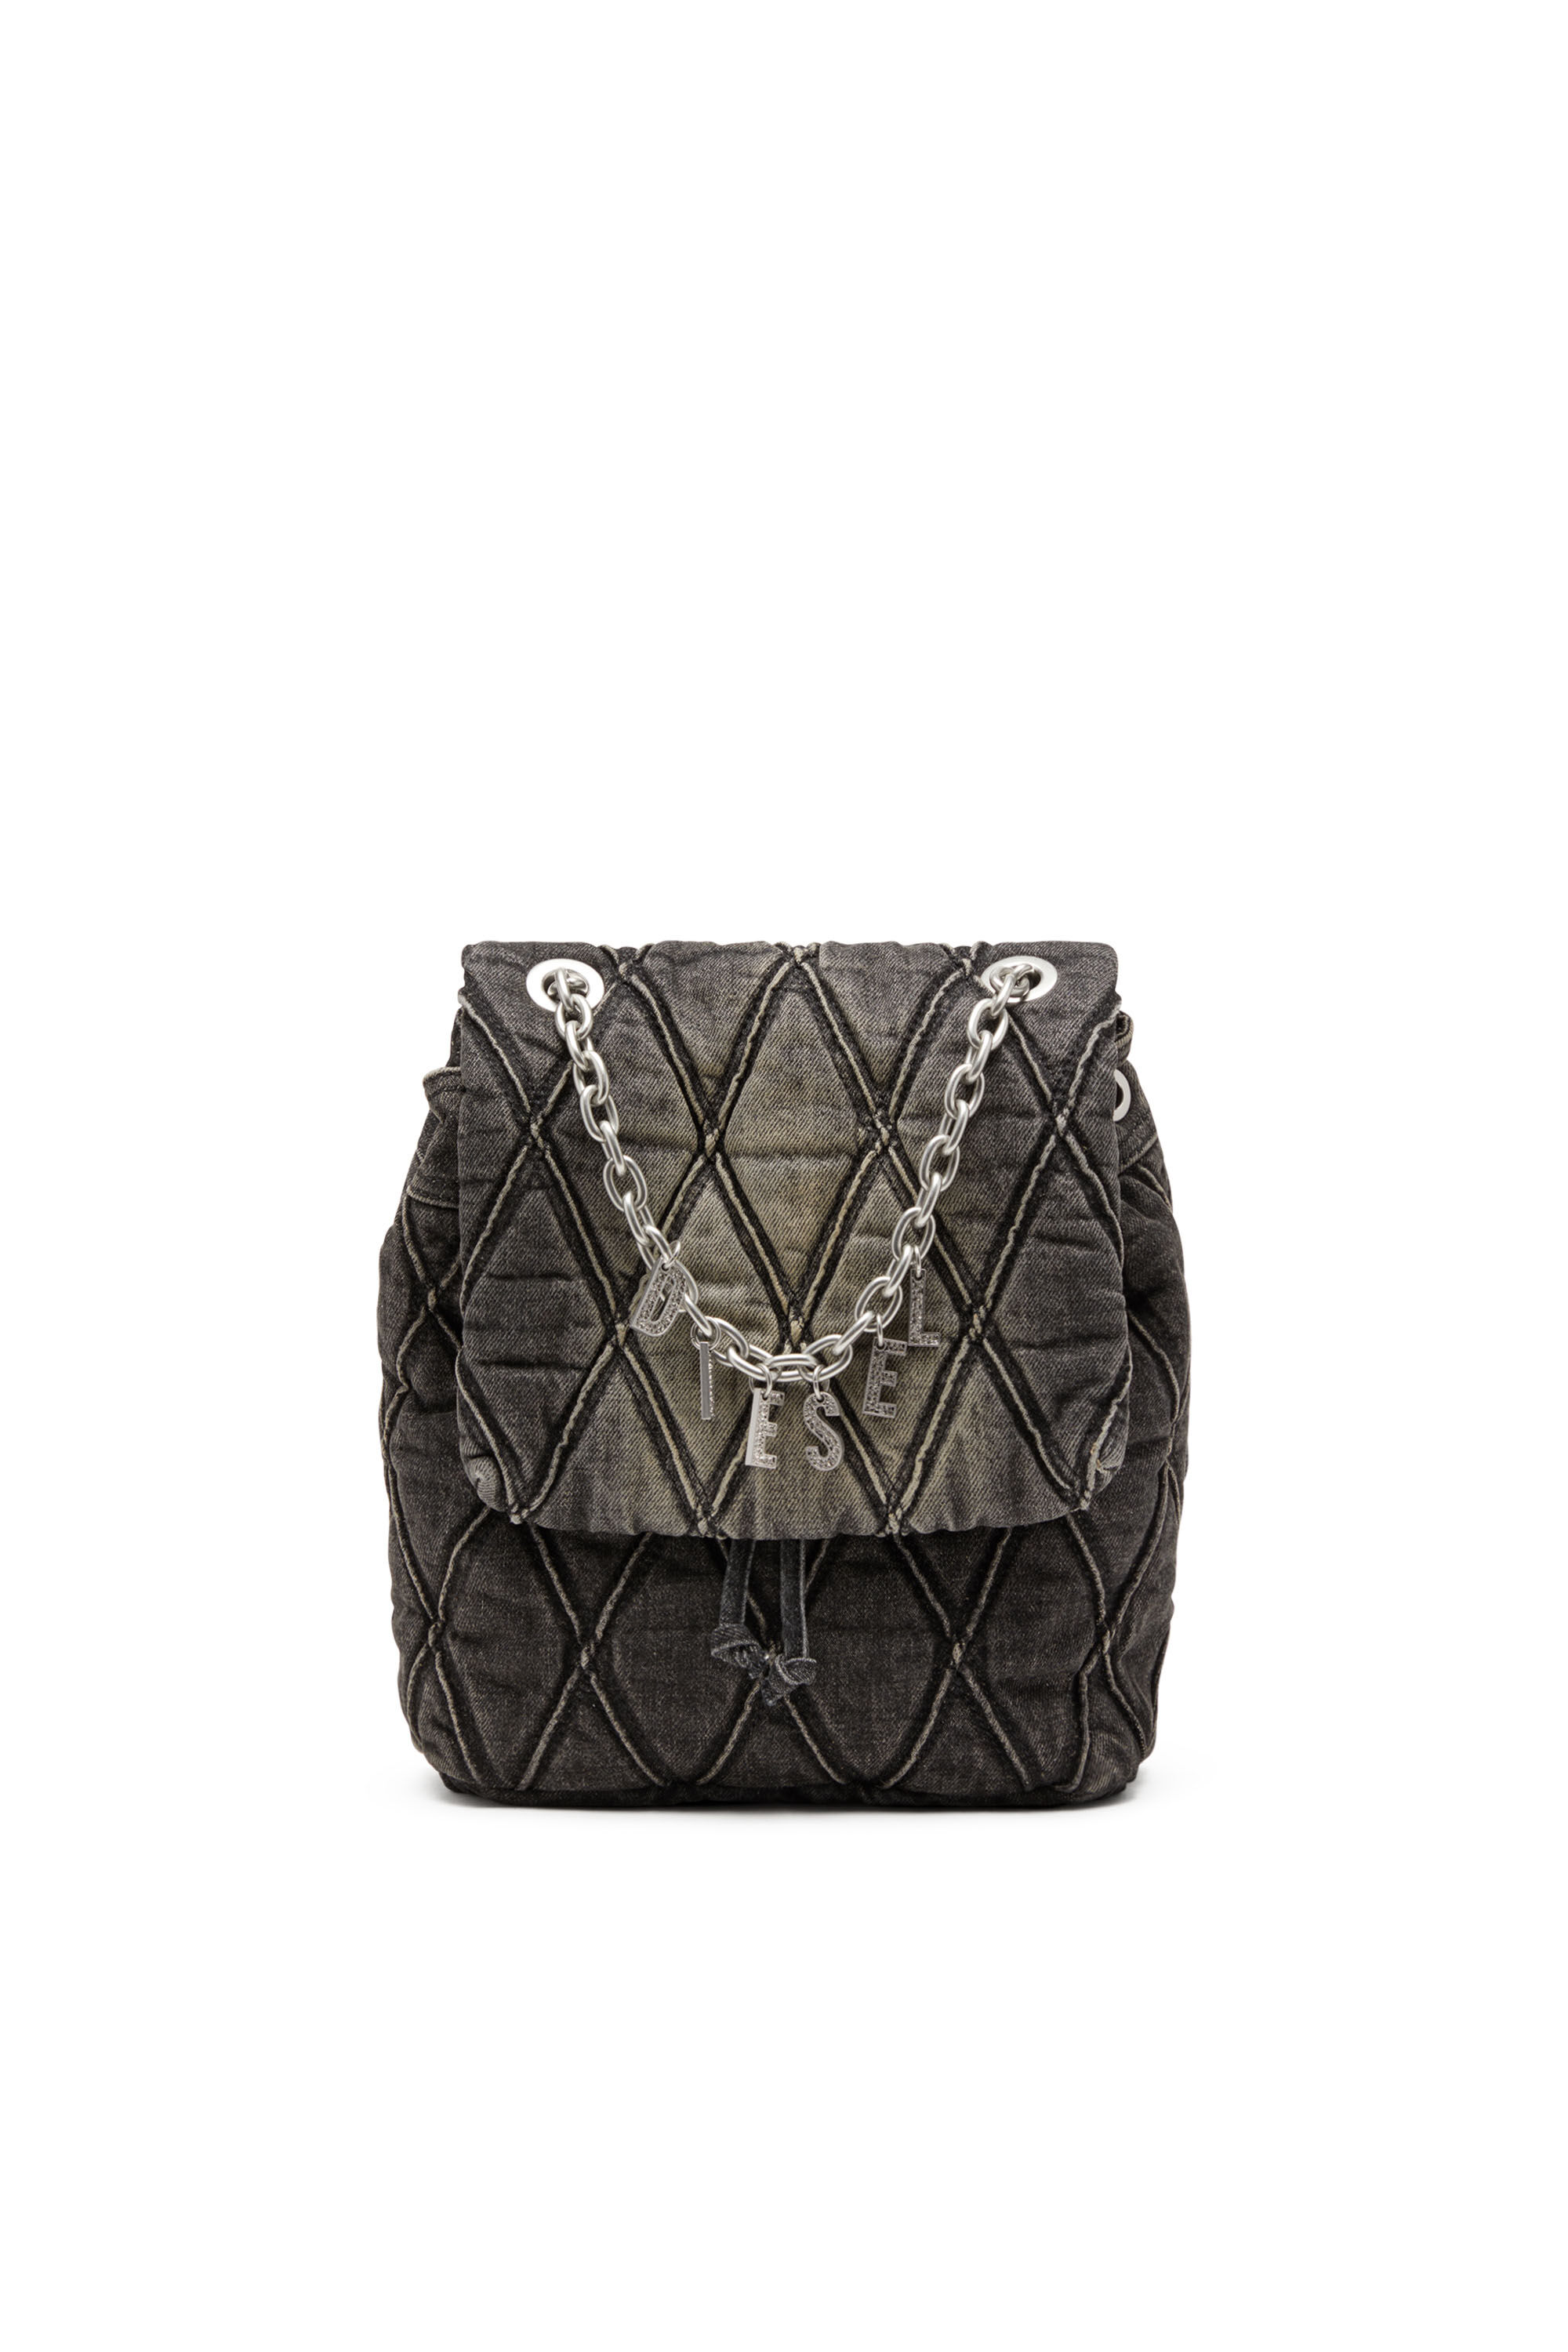 Diesel - CHARM-D BACKPACK S, Woman Charm-D S-Backpack in Argyle quilted denim in Black - Image 1